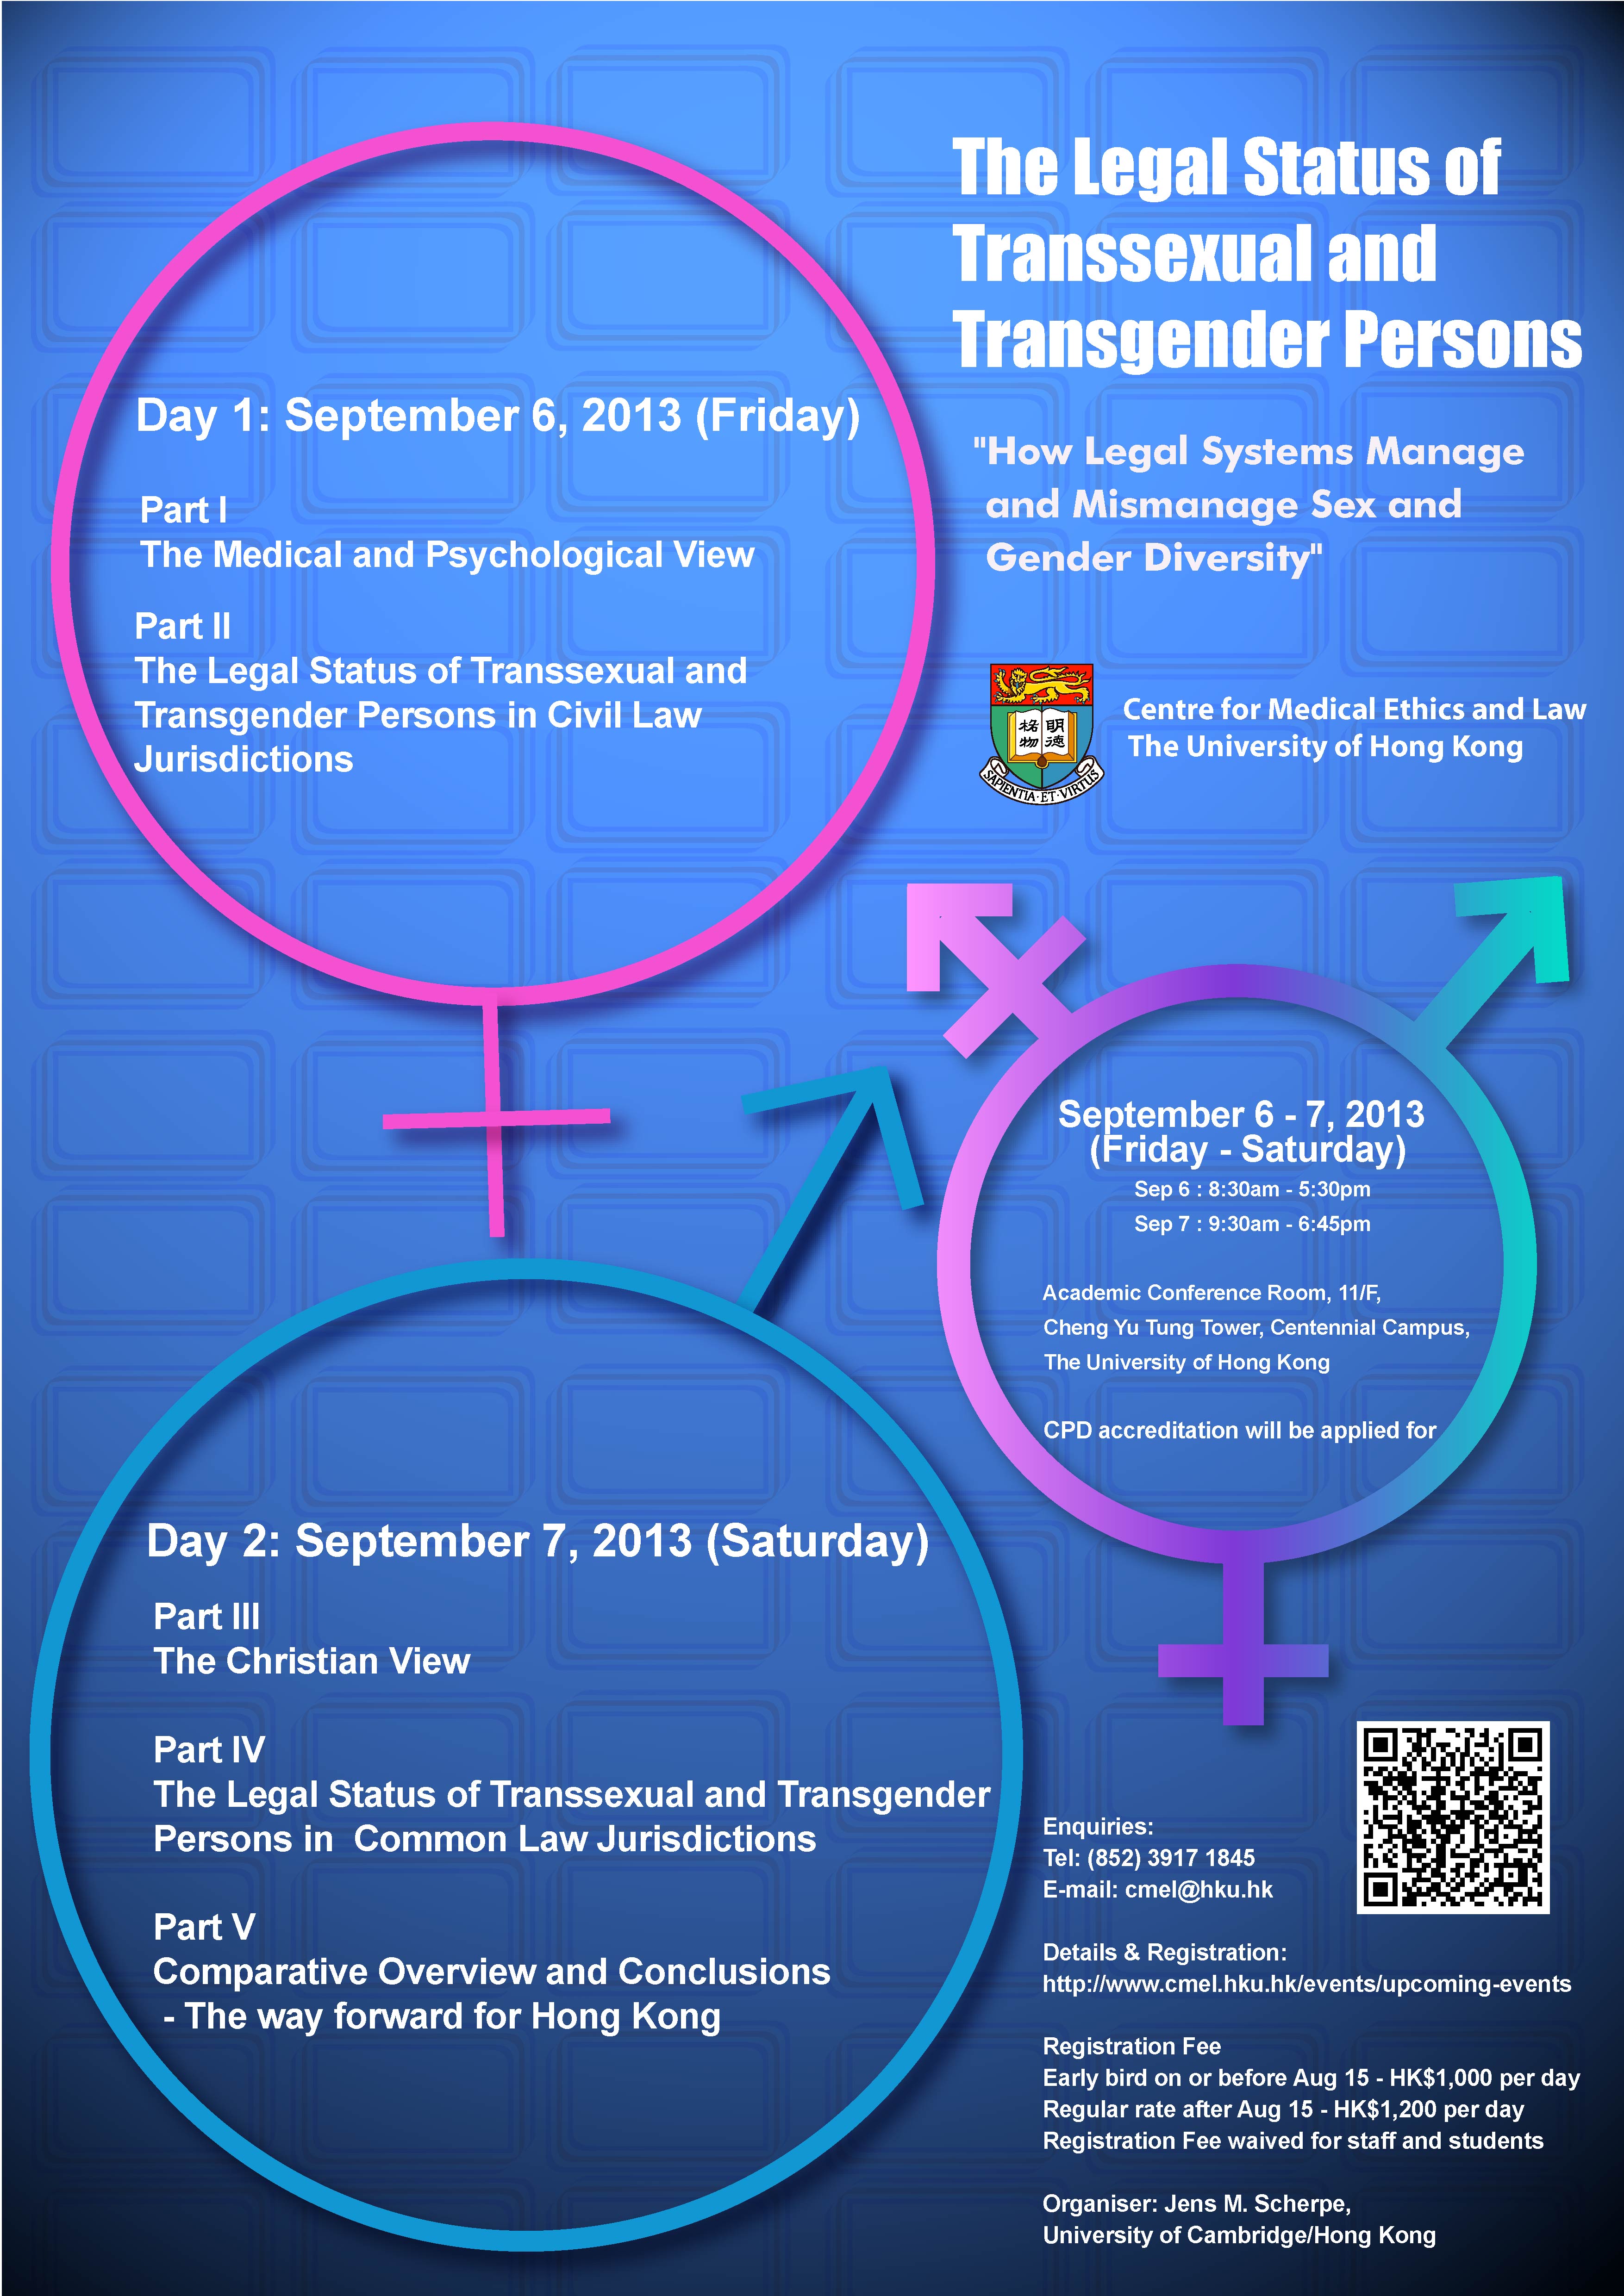 Conference: The Legal Status of Transsexual and Transgender Persons (September 6-7, 2013)